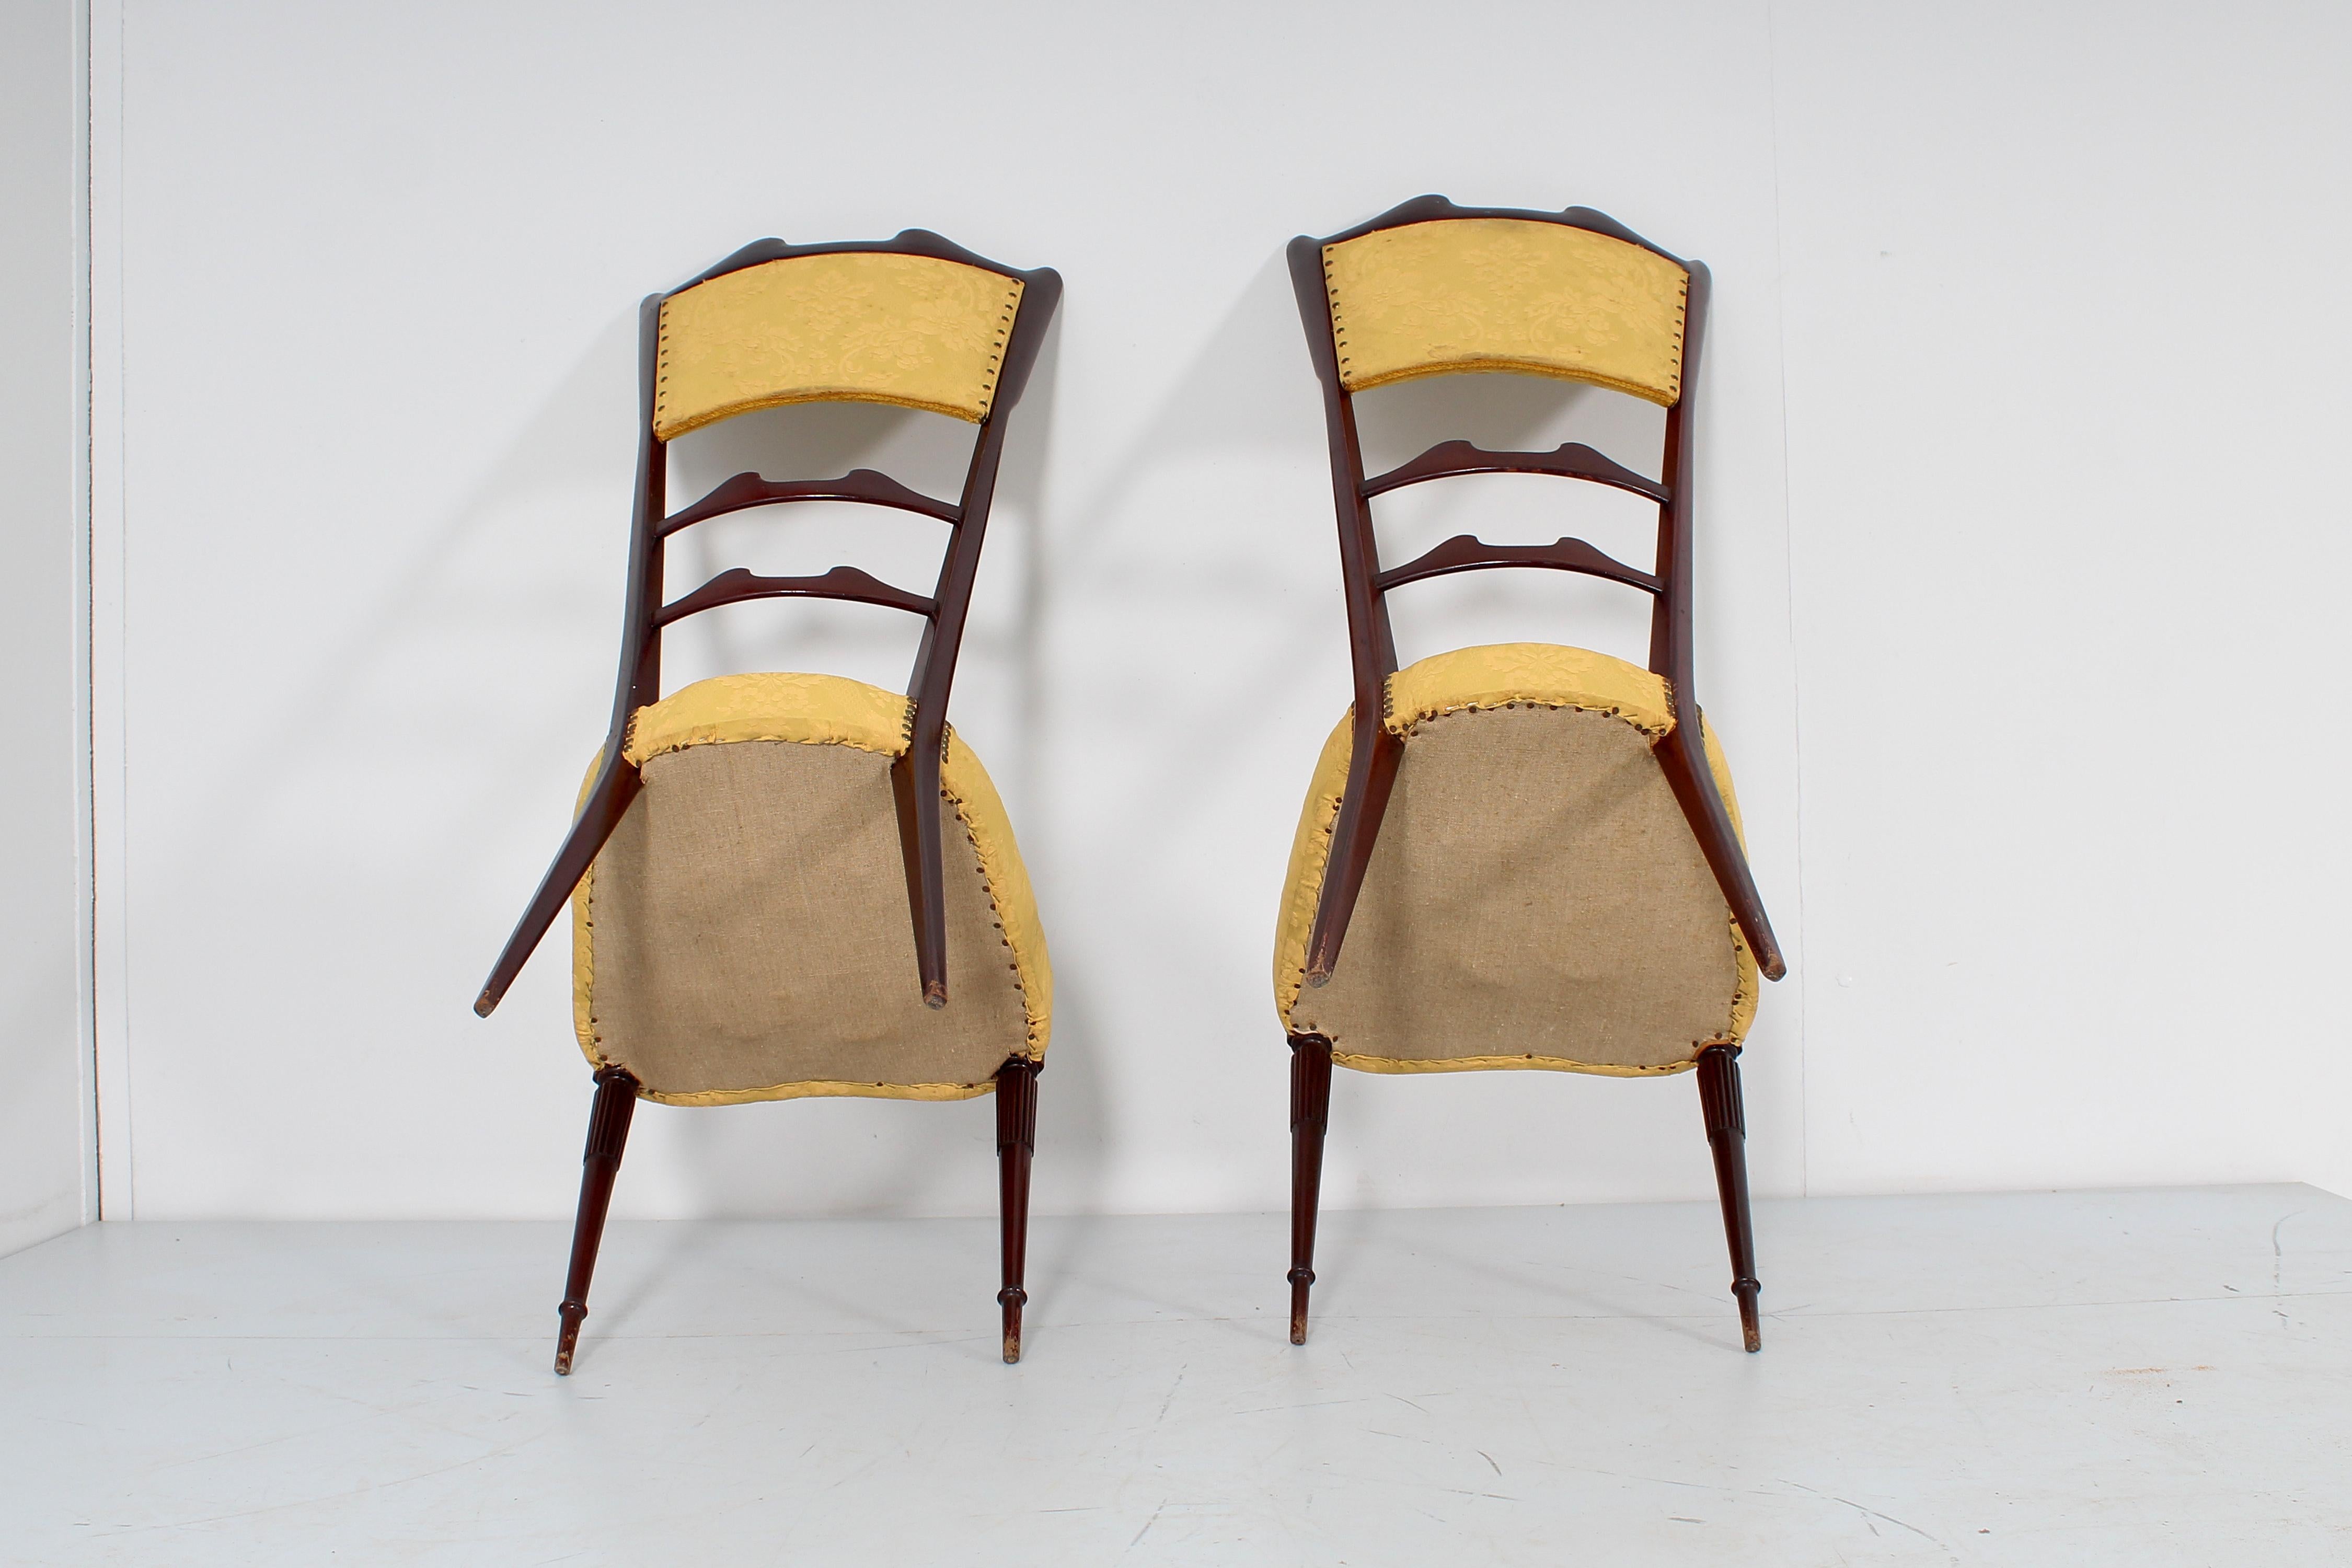 Midcentury Giò Ponti Style High Espalier Chairs Set of 2, 1950s, Italy For Sale 5